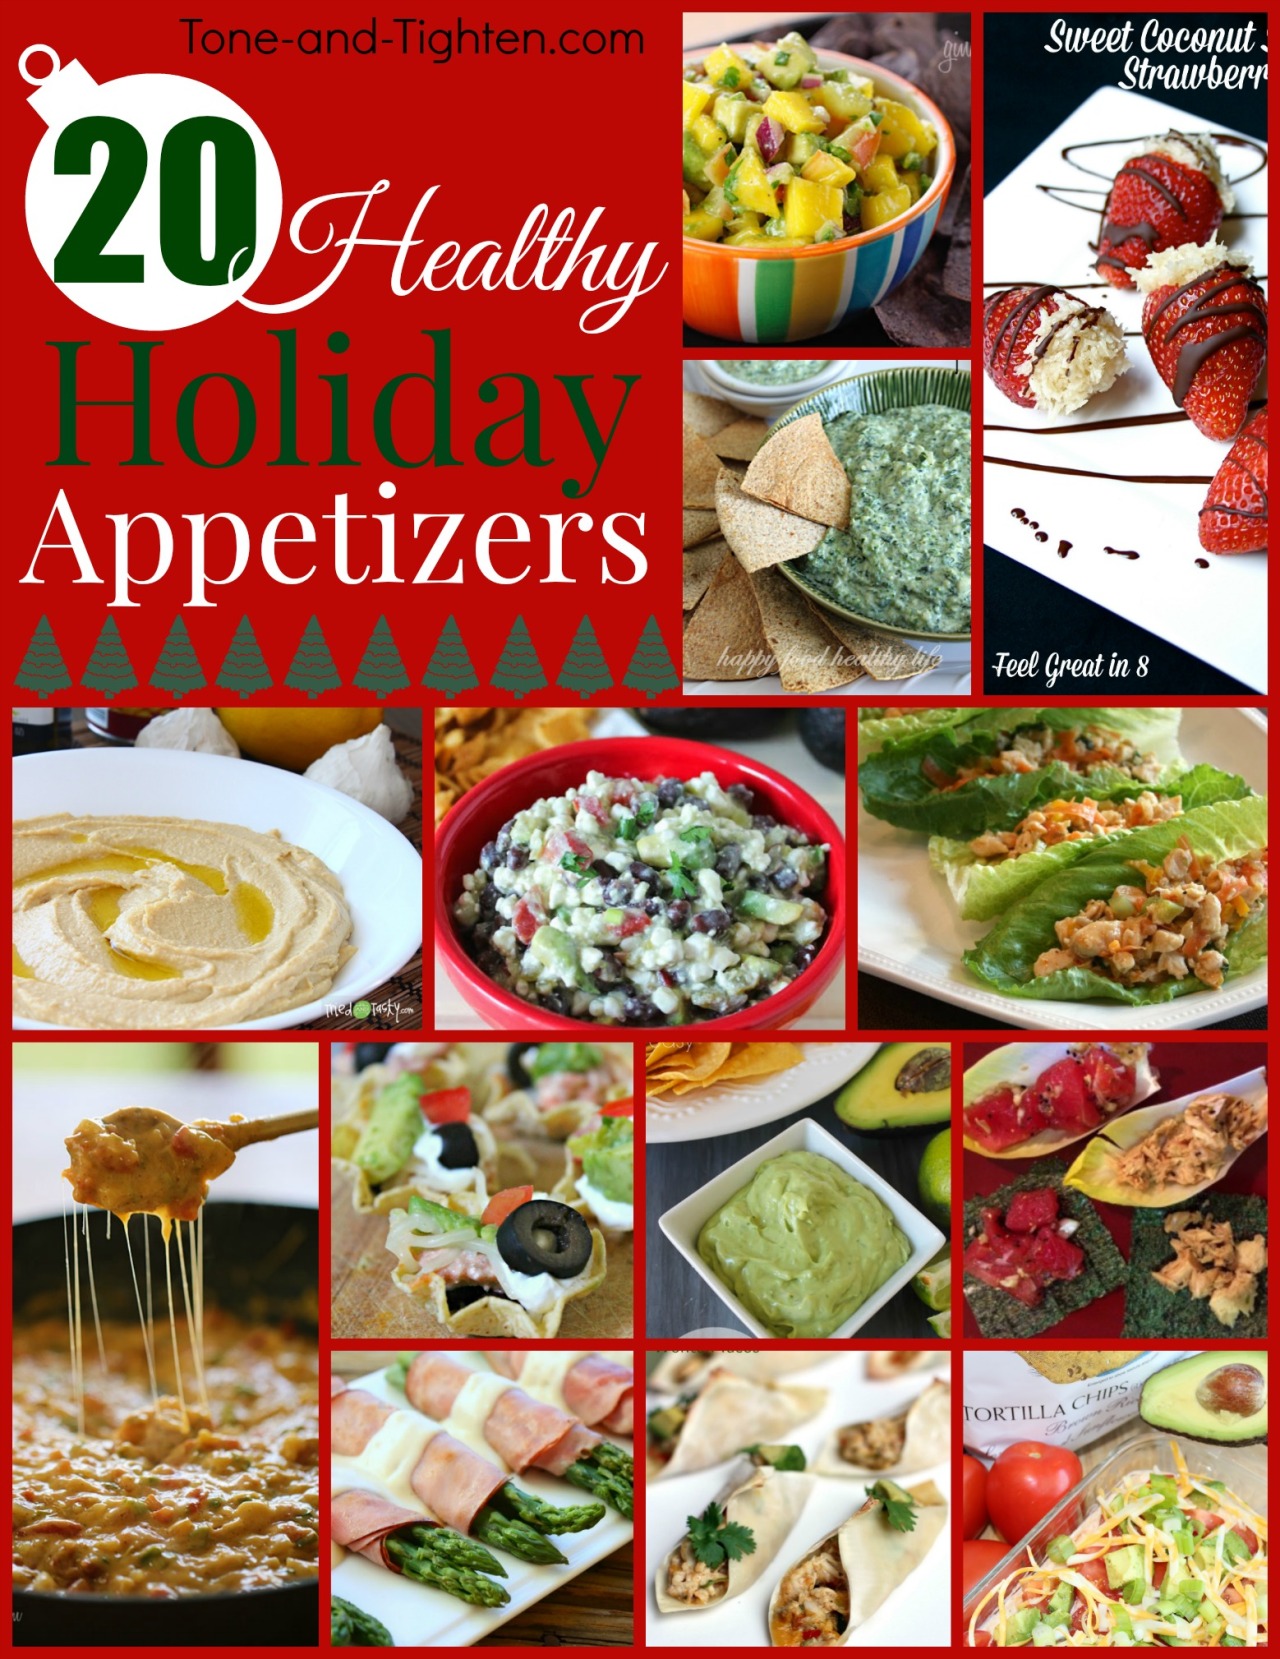 Bring the perfect healthy appetizer to your next holiday party with one of these 20 AMAZING recipes!